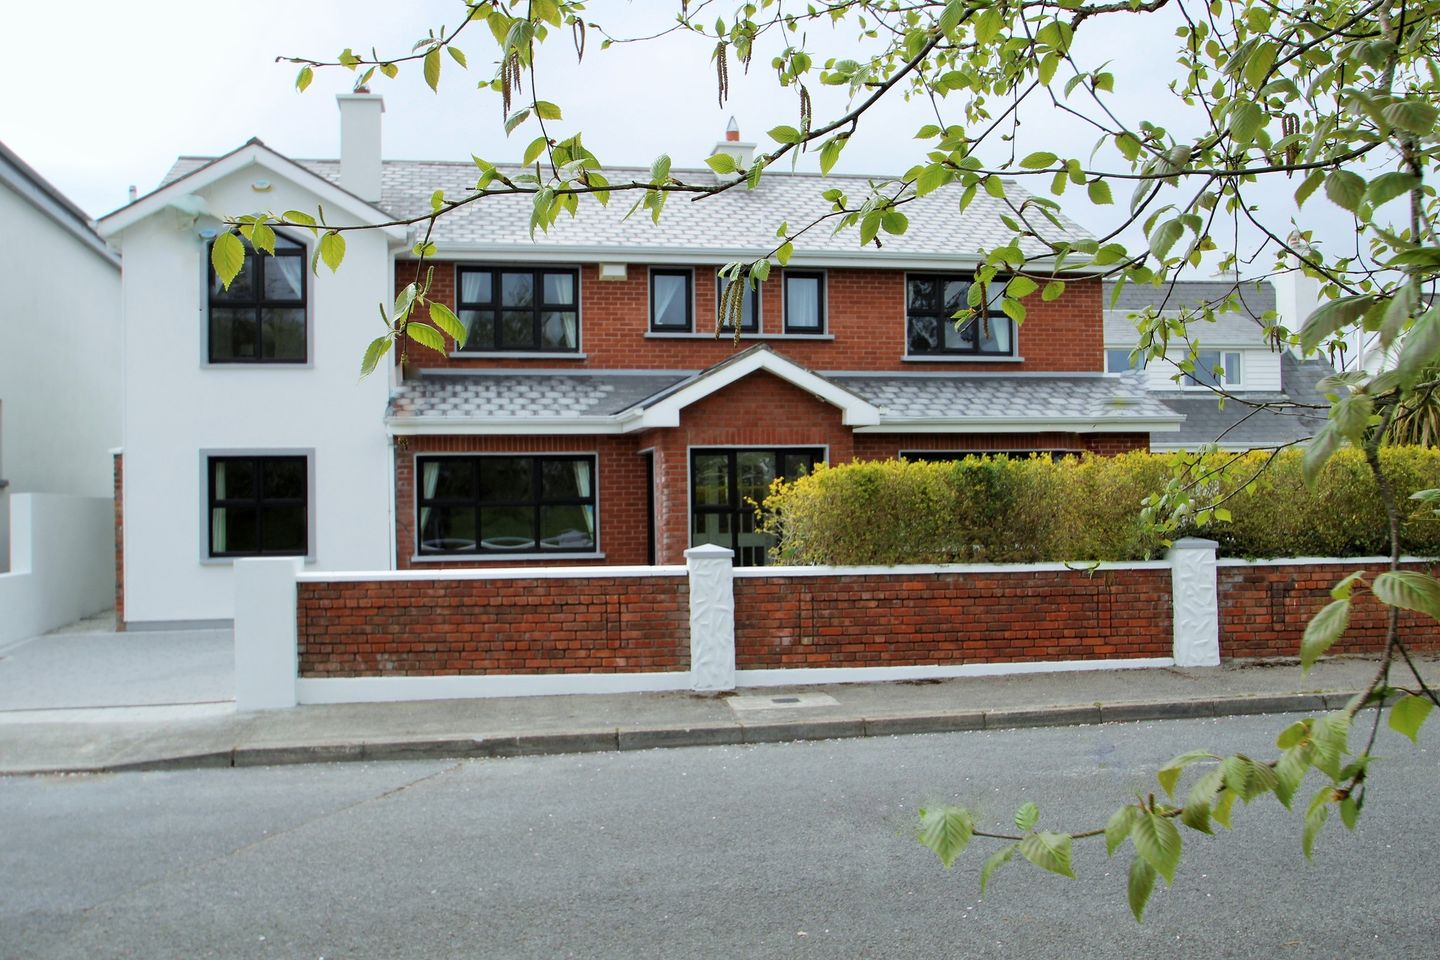 56 Maunsells Park, Taylors Hill Road, Salthill, Co. Galway